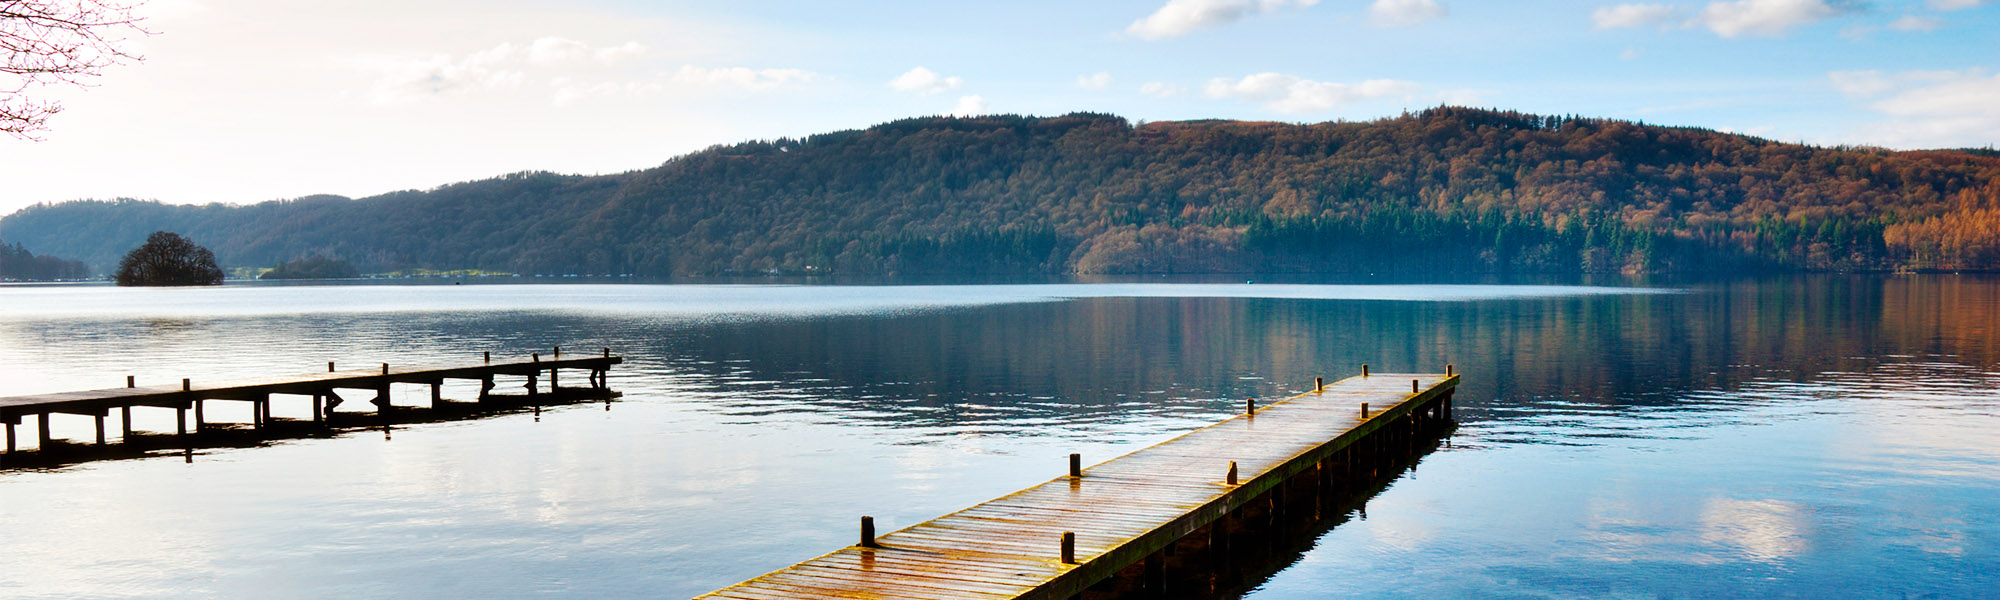 tourhub | Just Go Holidays | The Lovely English Lake District  